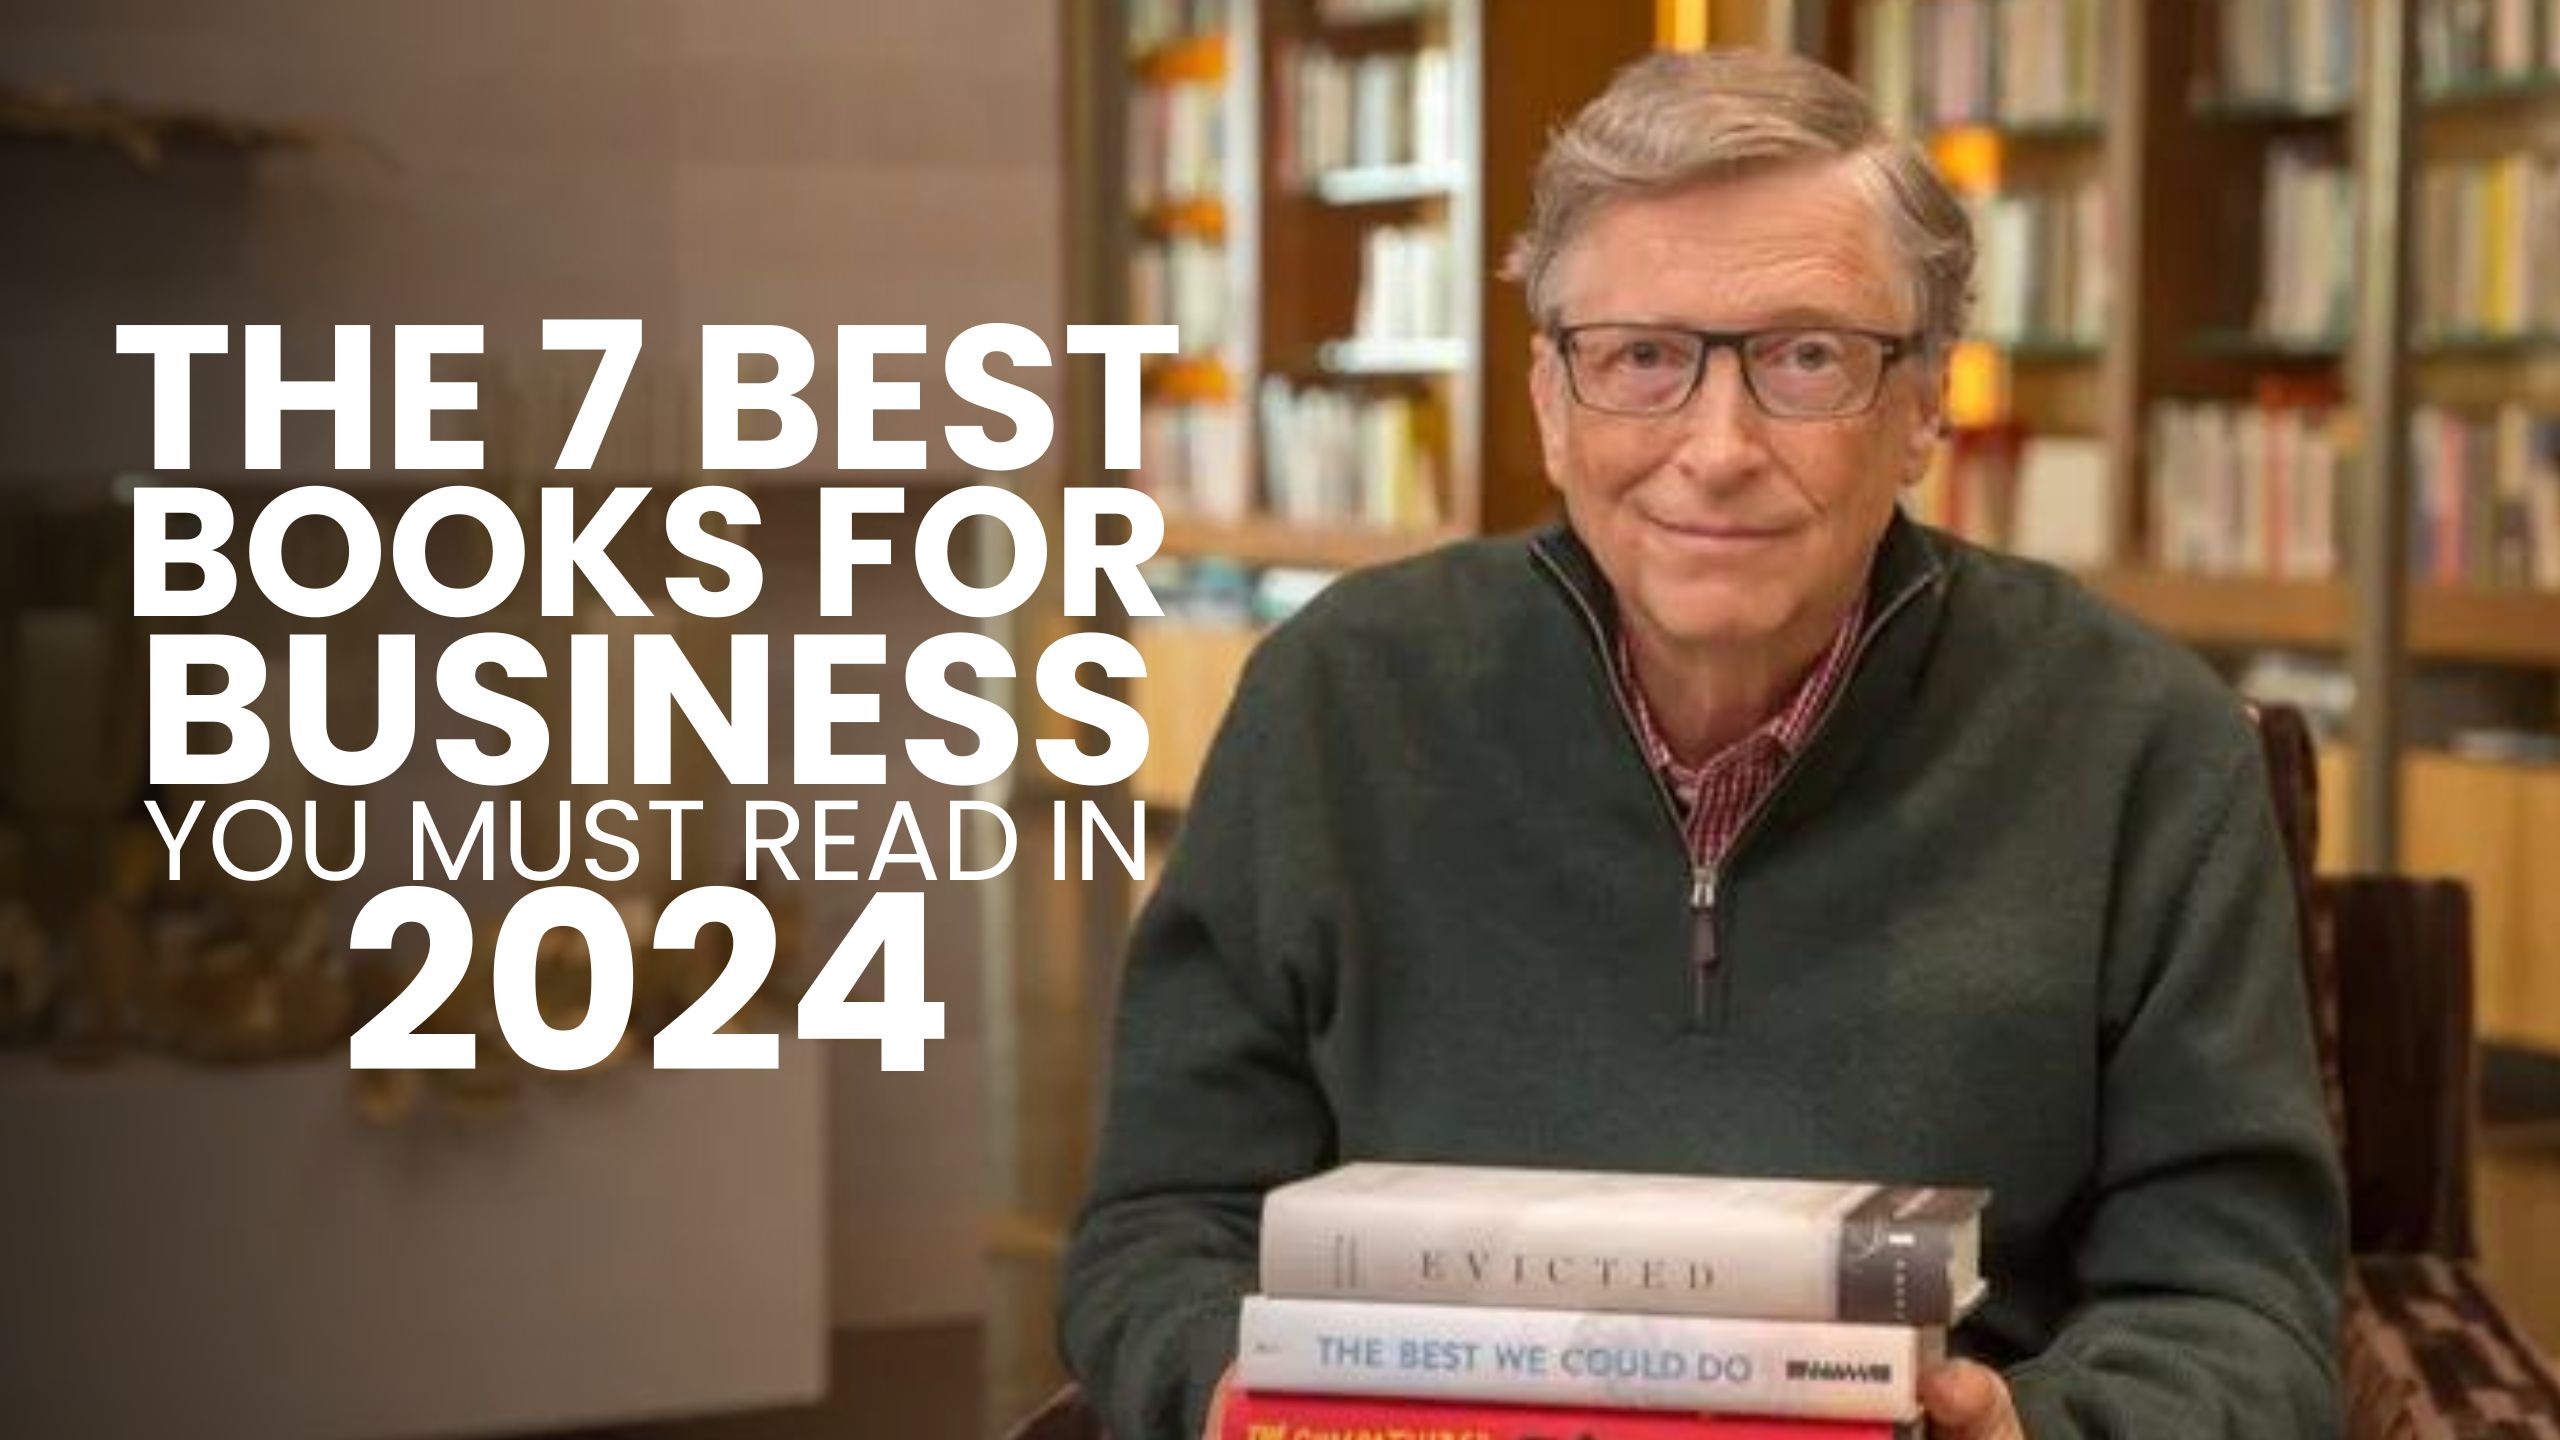 THE 7 BEST BOOKS FOR BUSINESS YOU MUST READ IN 2024